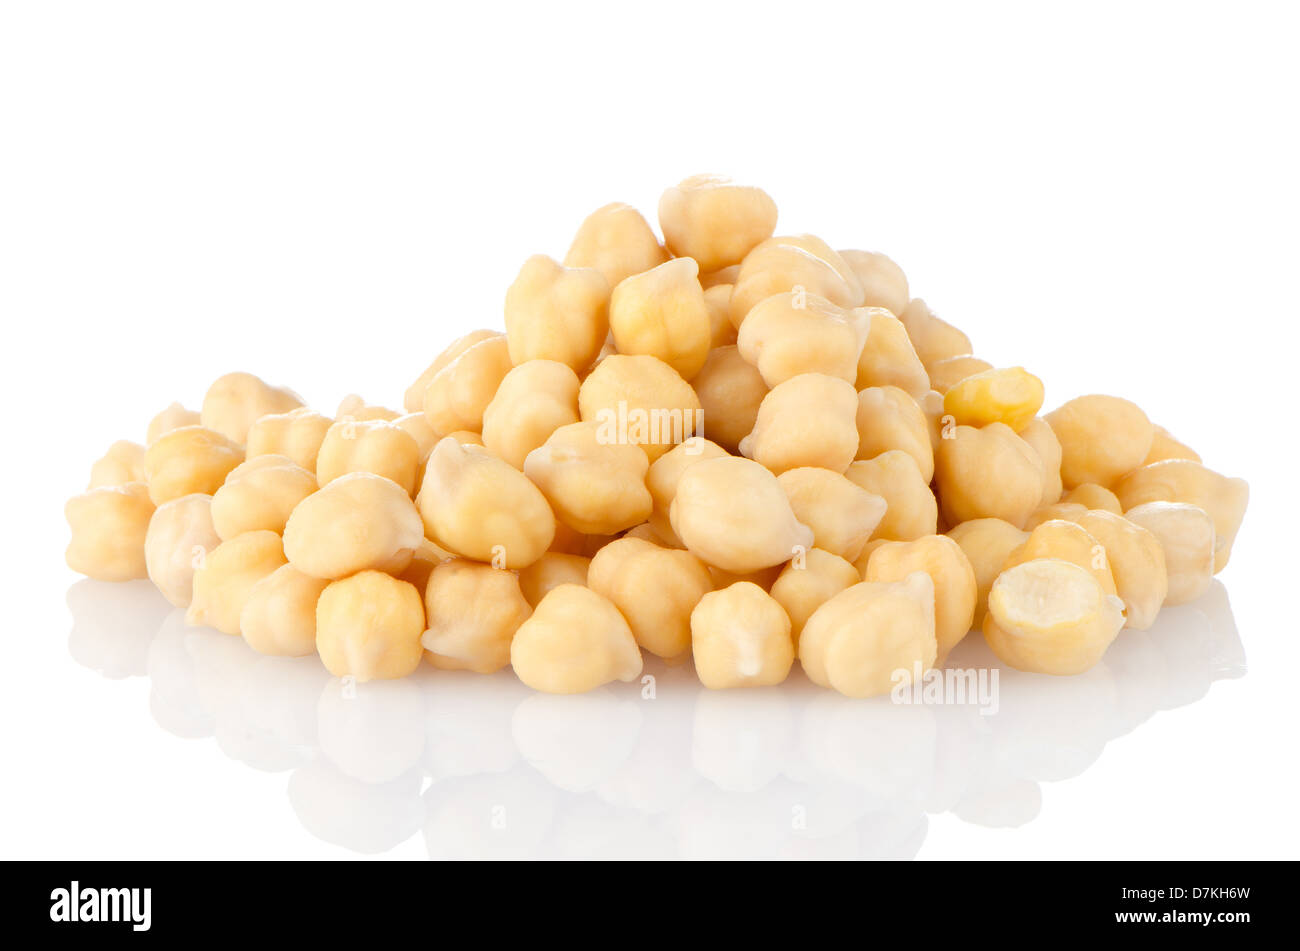 Pile of chickpeas against white background Stock Photo